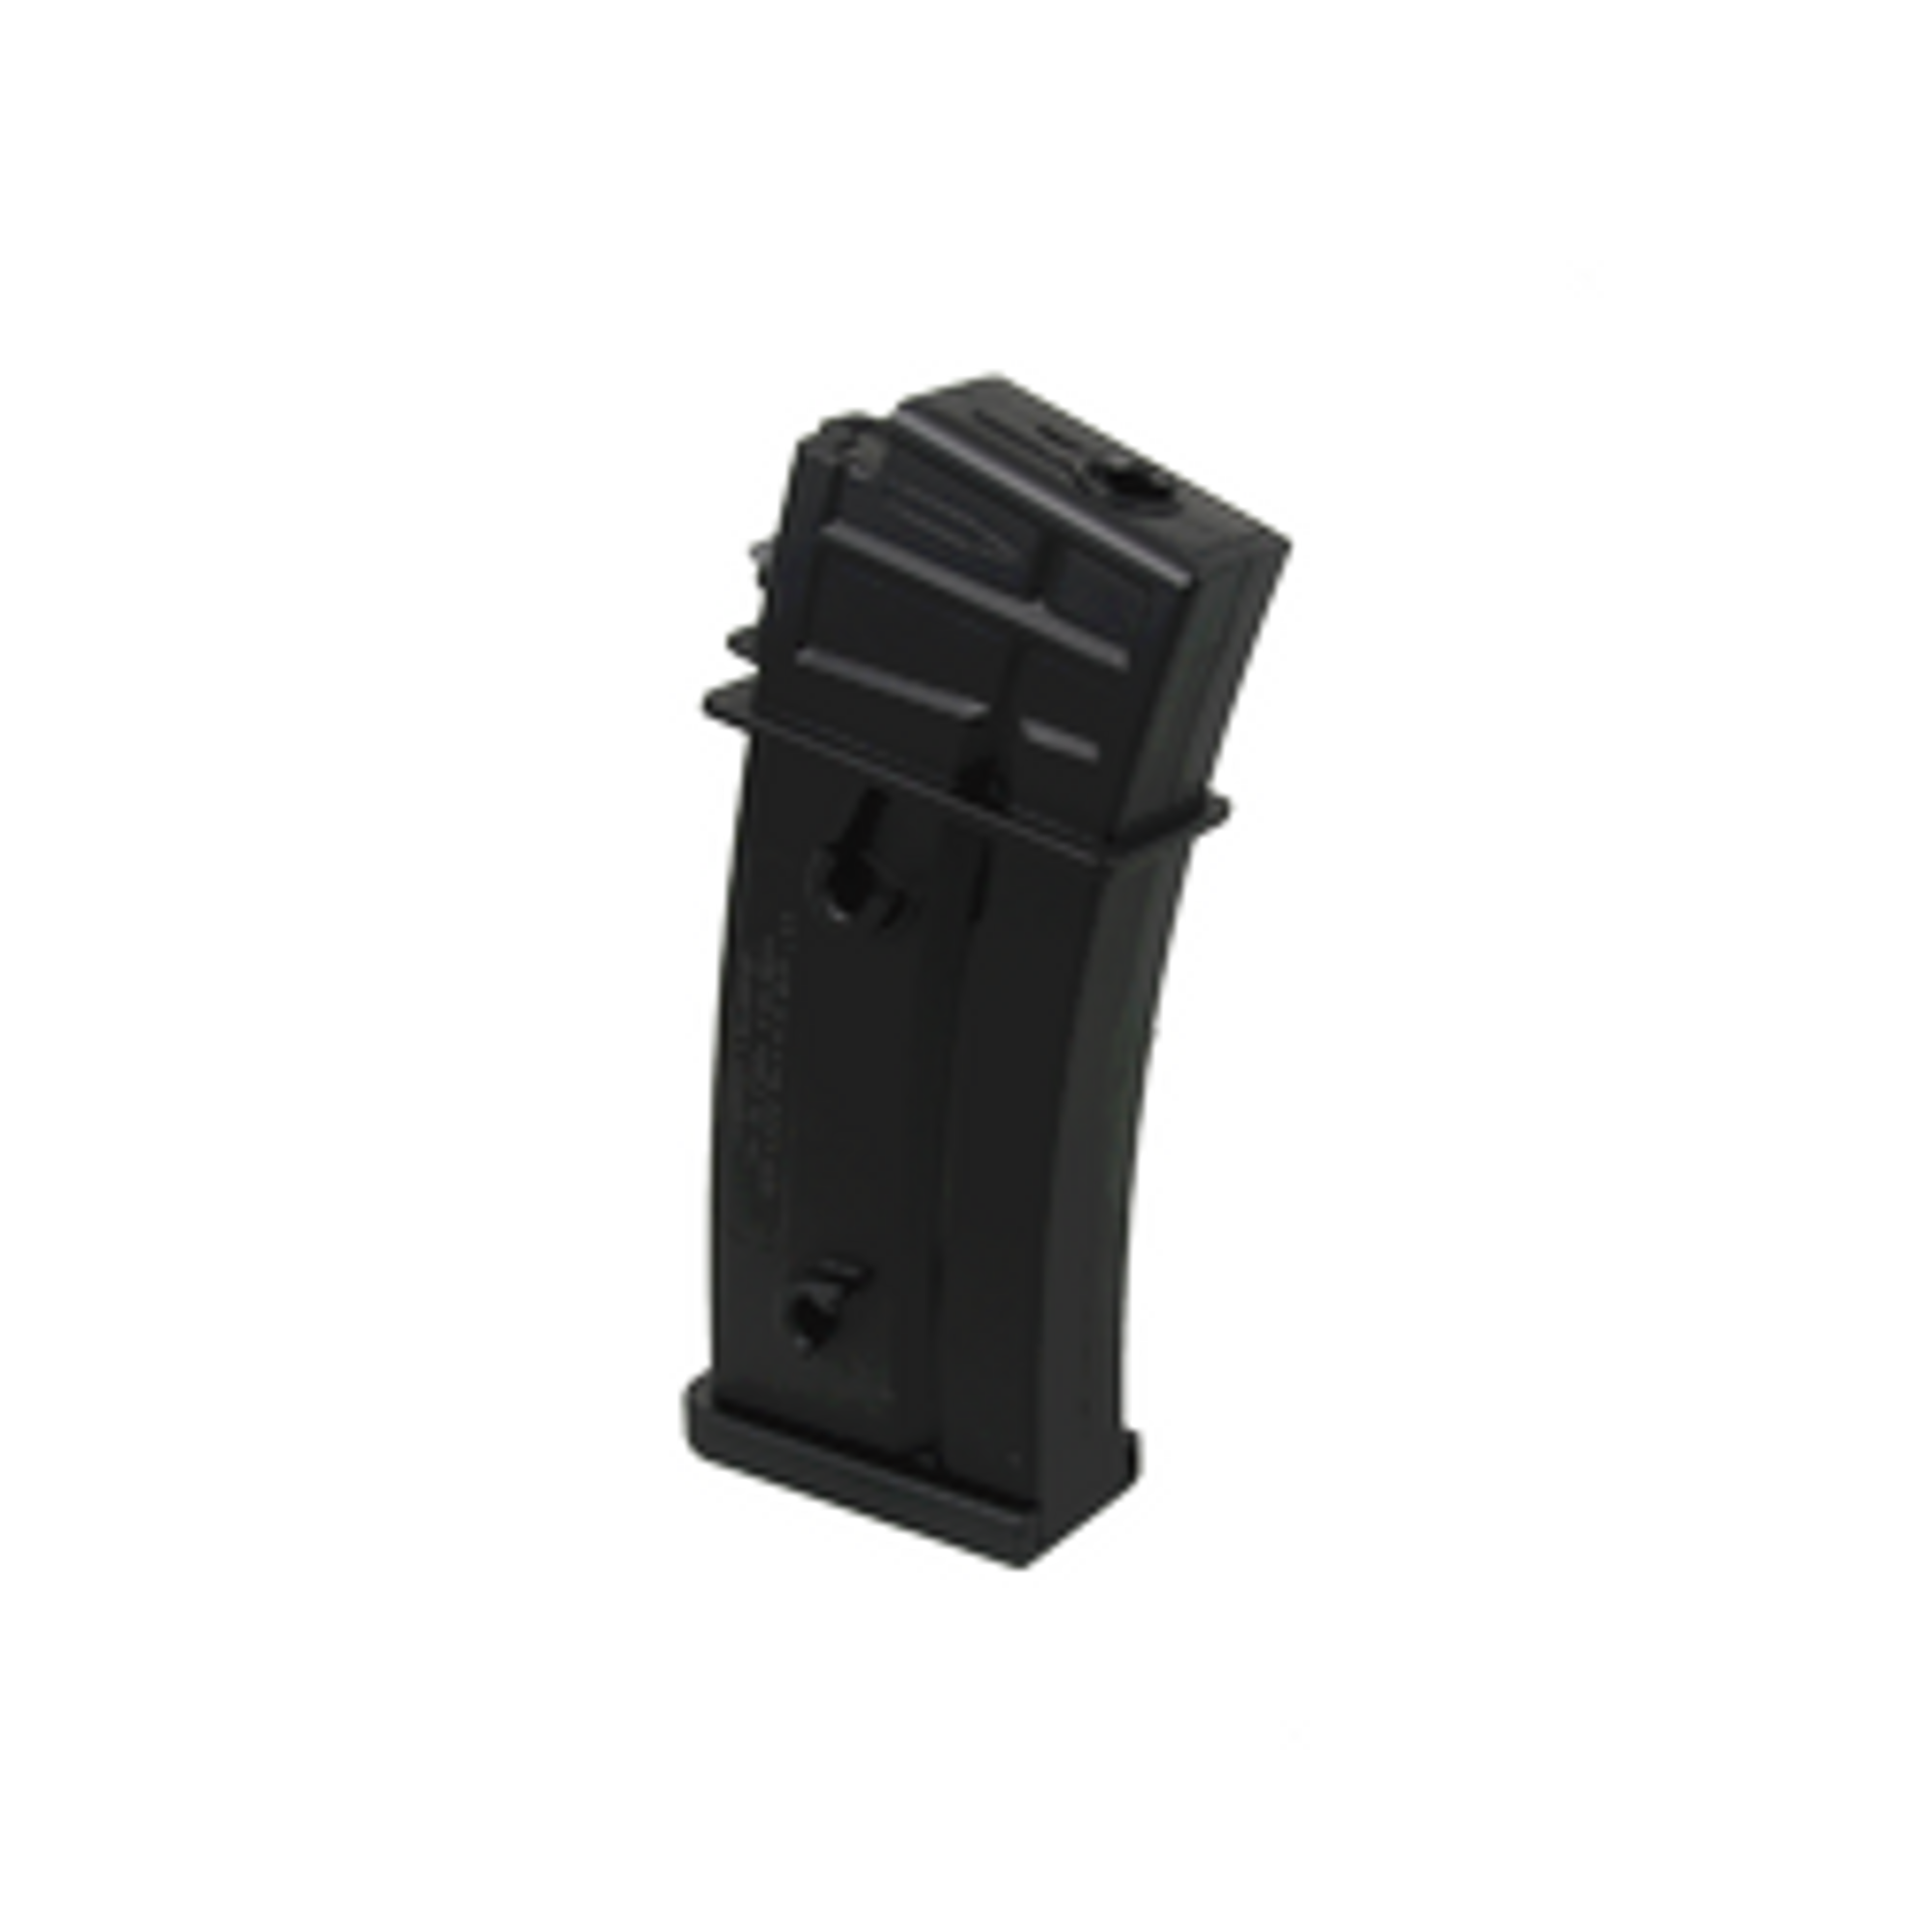 Classic Army G36 50rd Airsoft Magazine